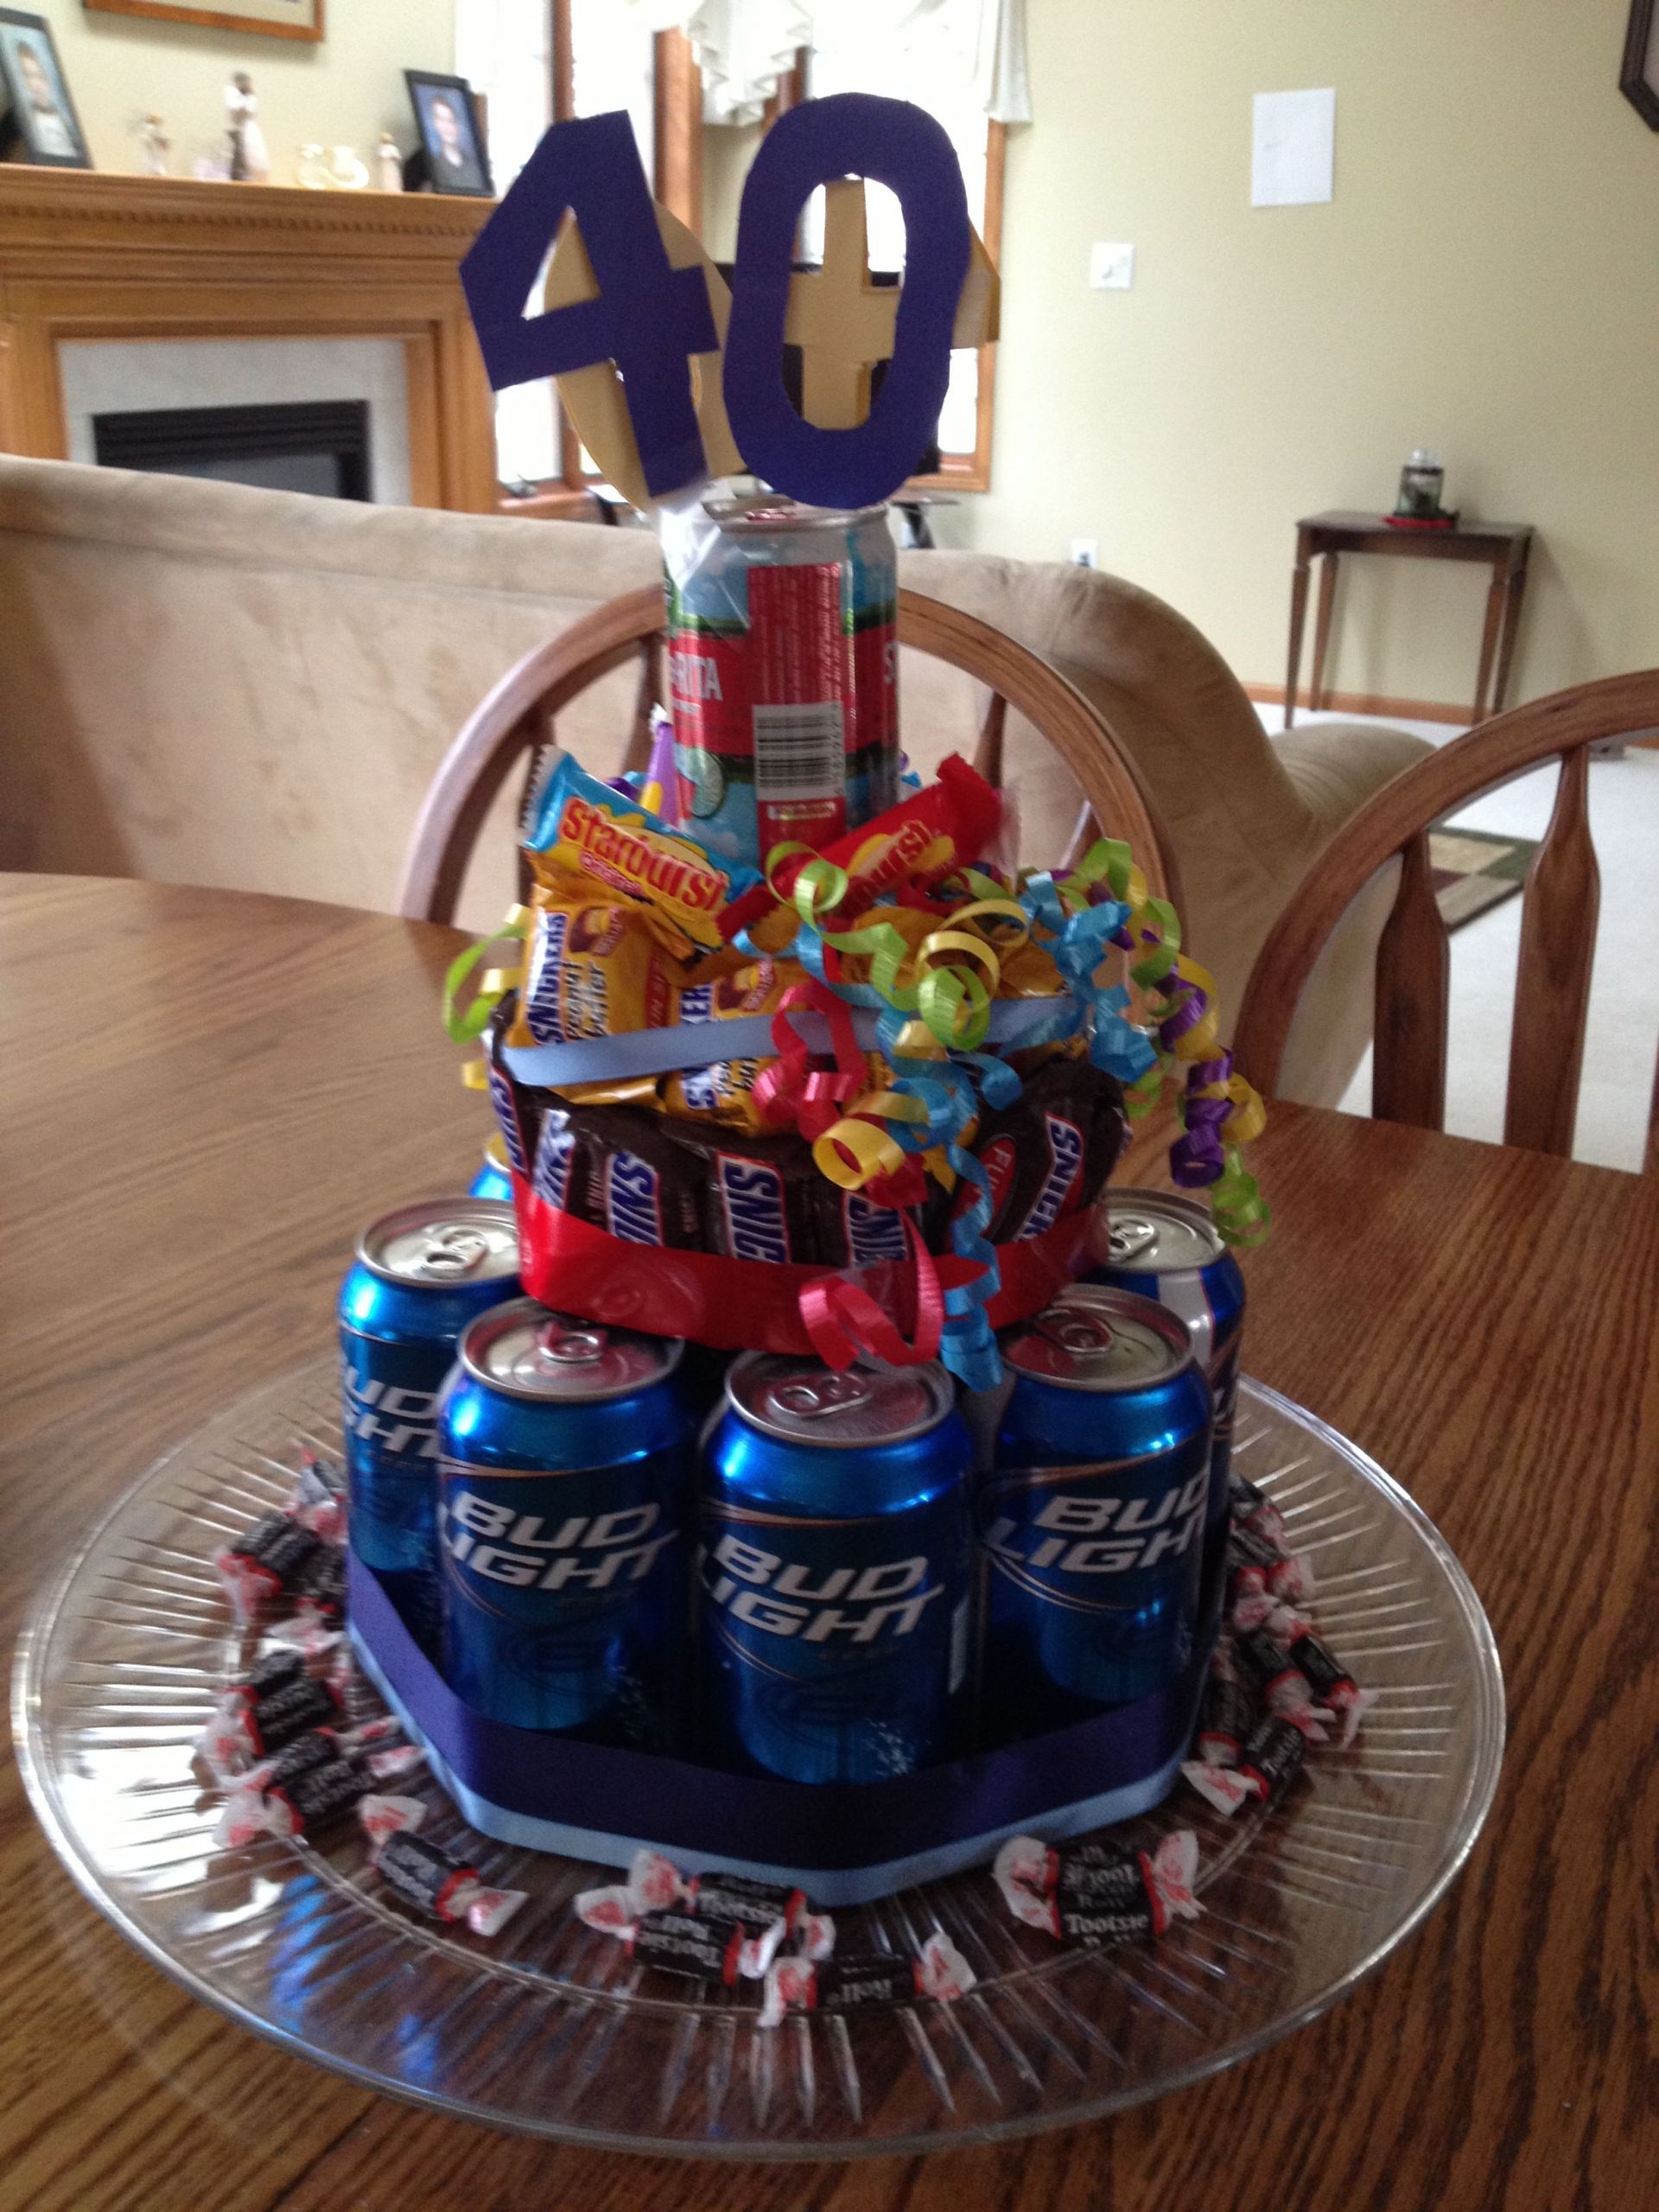 40th Birthday Cake Decorating Ideas
 Beer candy birthday cake for 40th birthday But has to be